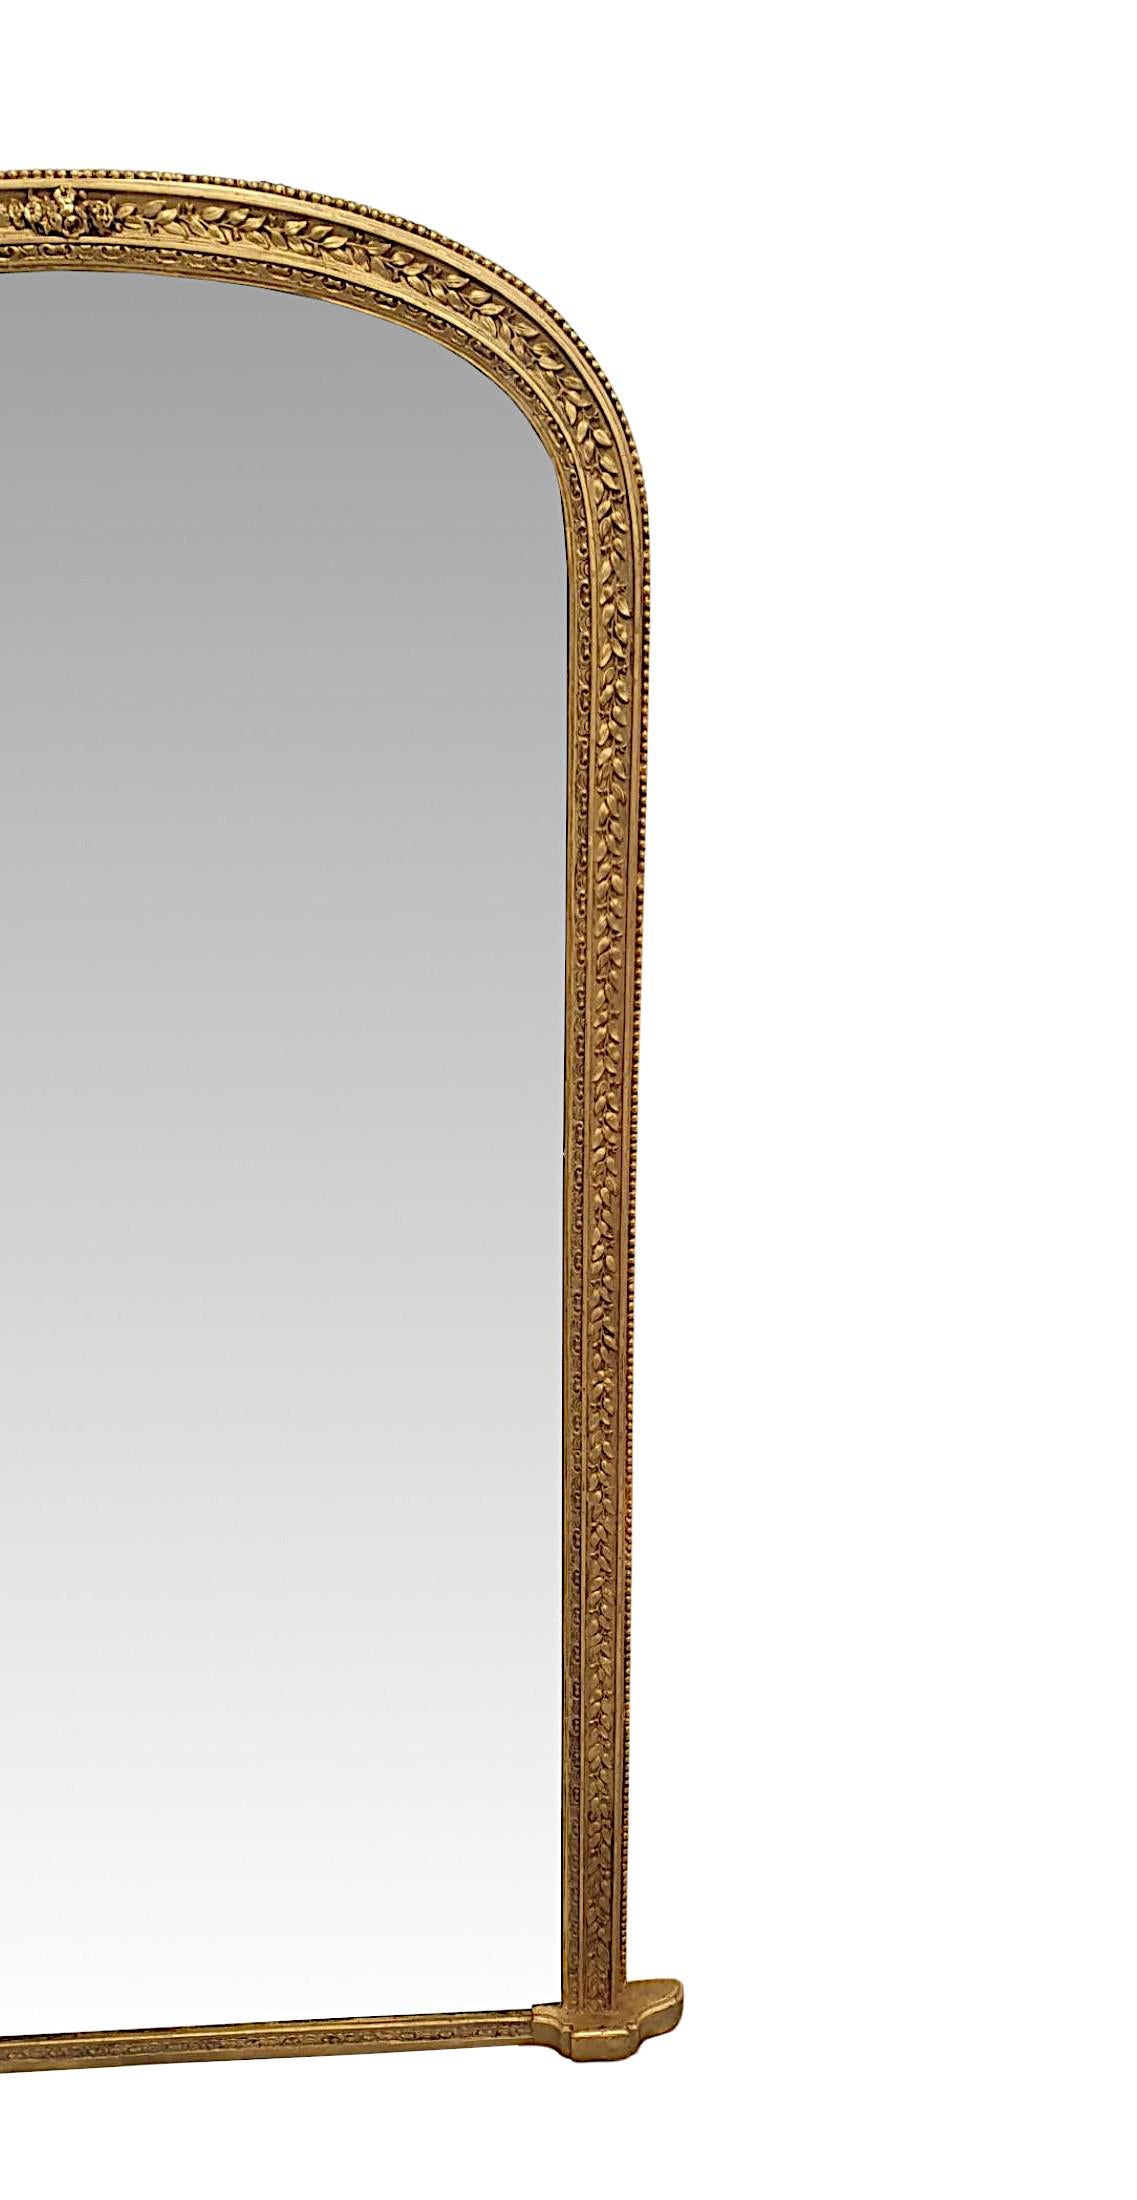 English A Very Rare 19th Century Dressing or Pier Mirror For Sale